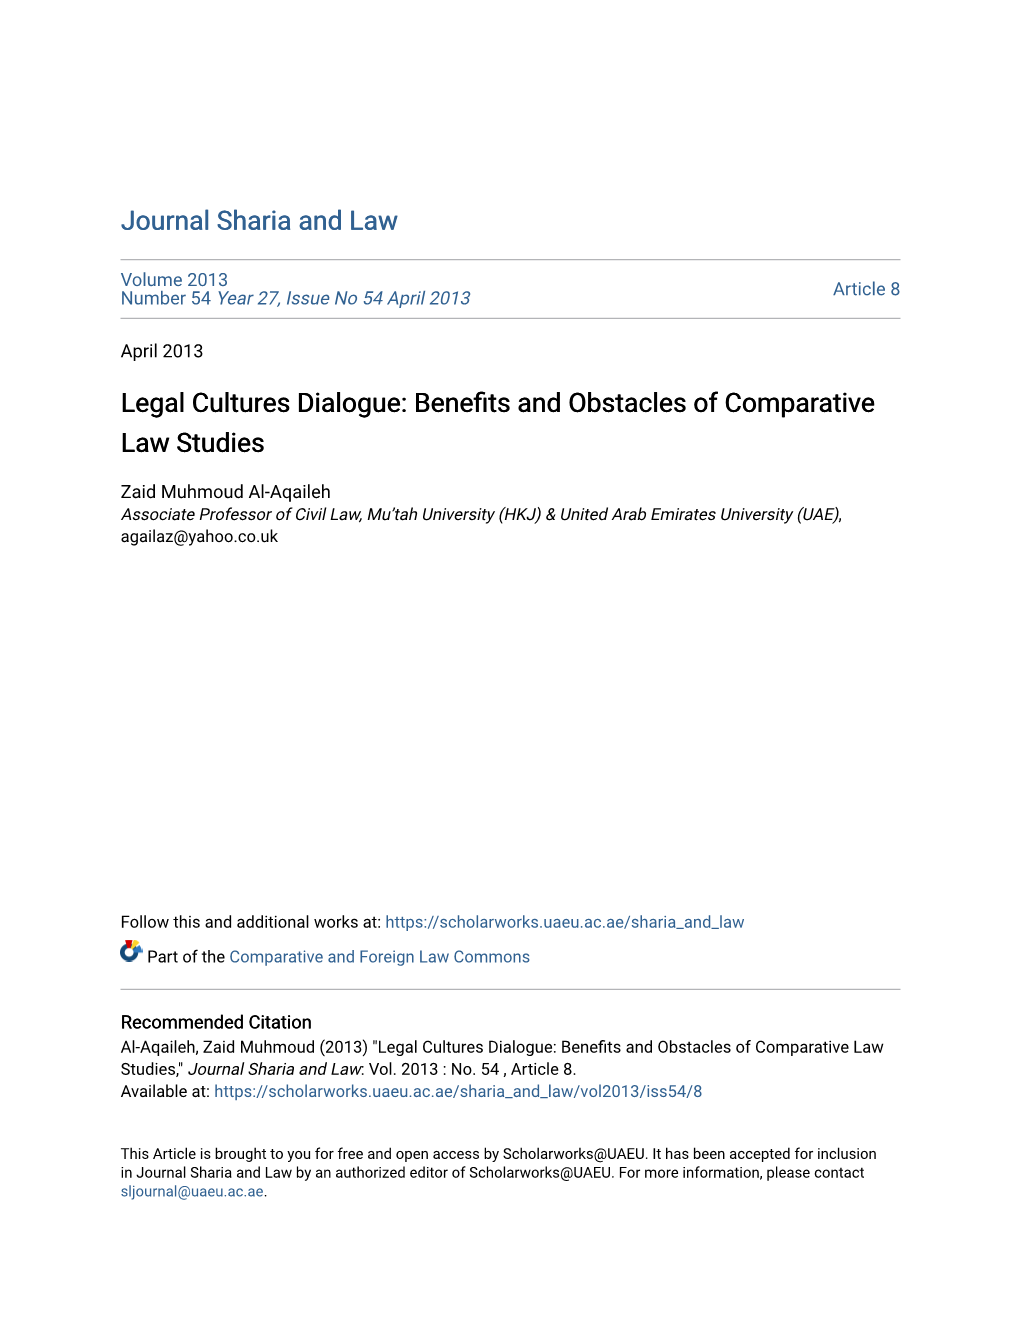 Legal Cultures Dialogue: Benefits and Obstacles of Comparative Law Studies